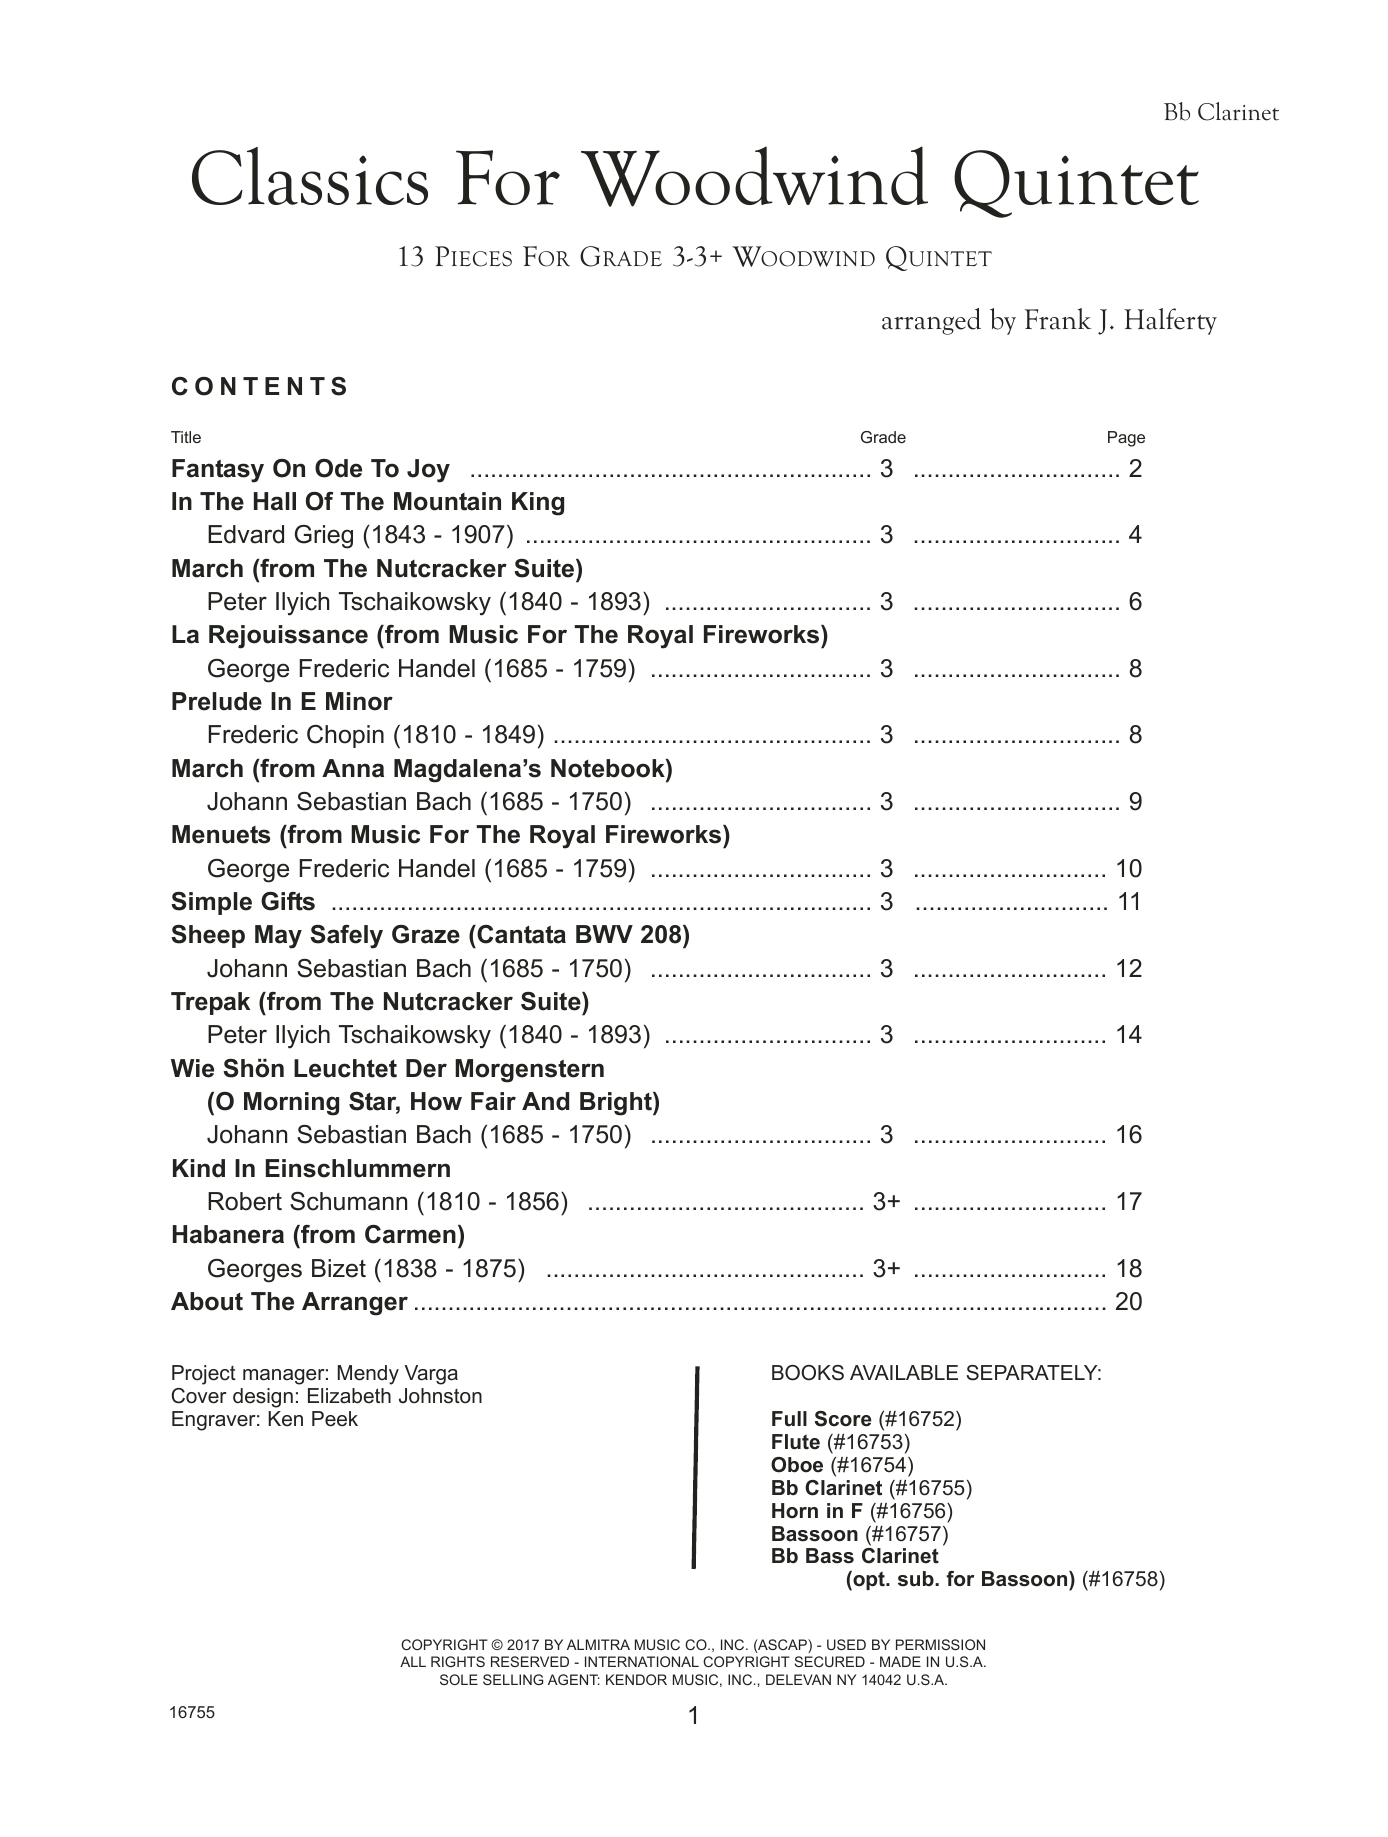 Frank J. Halferty Classics For Woodwind Quintet - Bb Clarinet sheet music preview music notes and score for Woodwind Ensemble including 20 page(s)